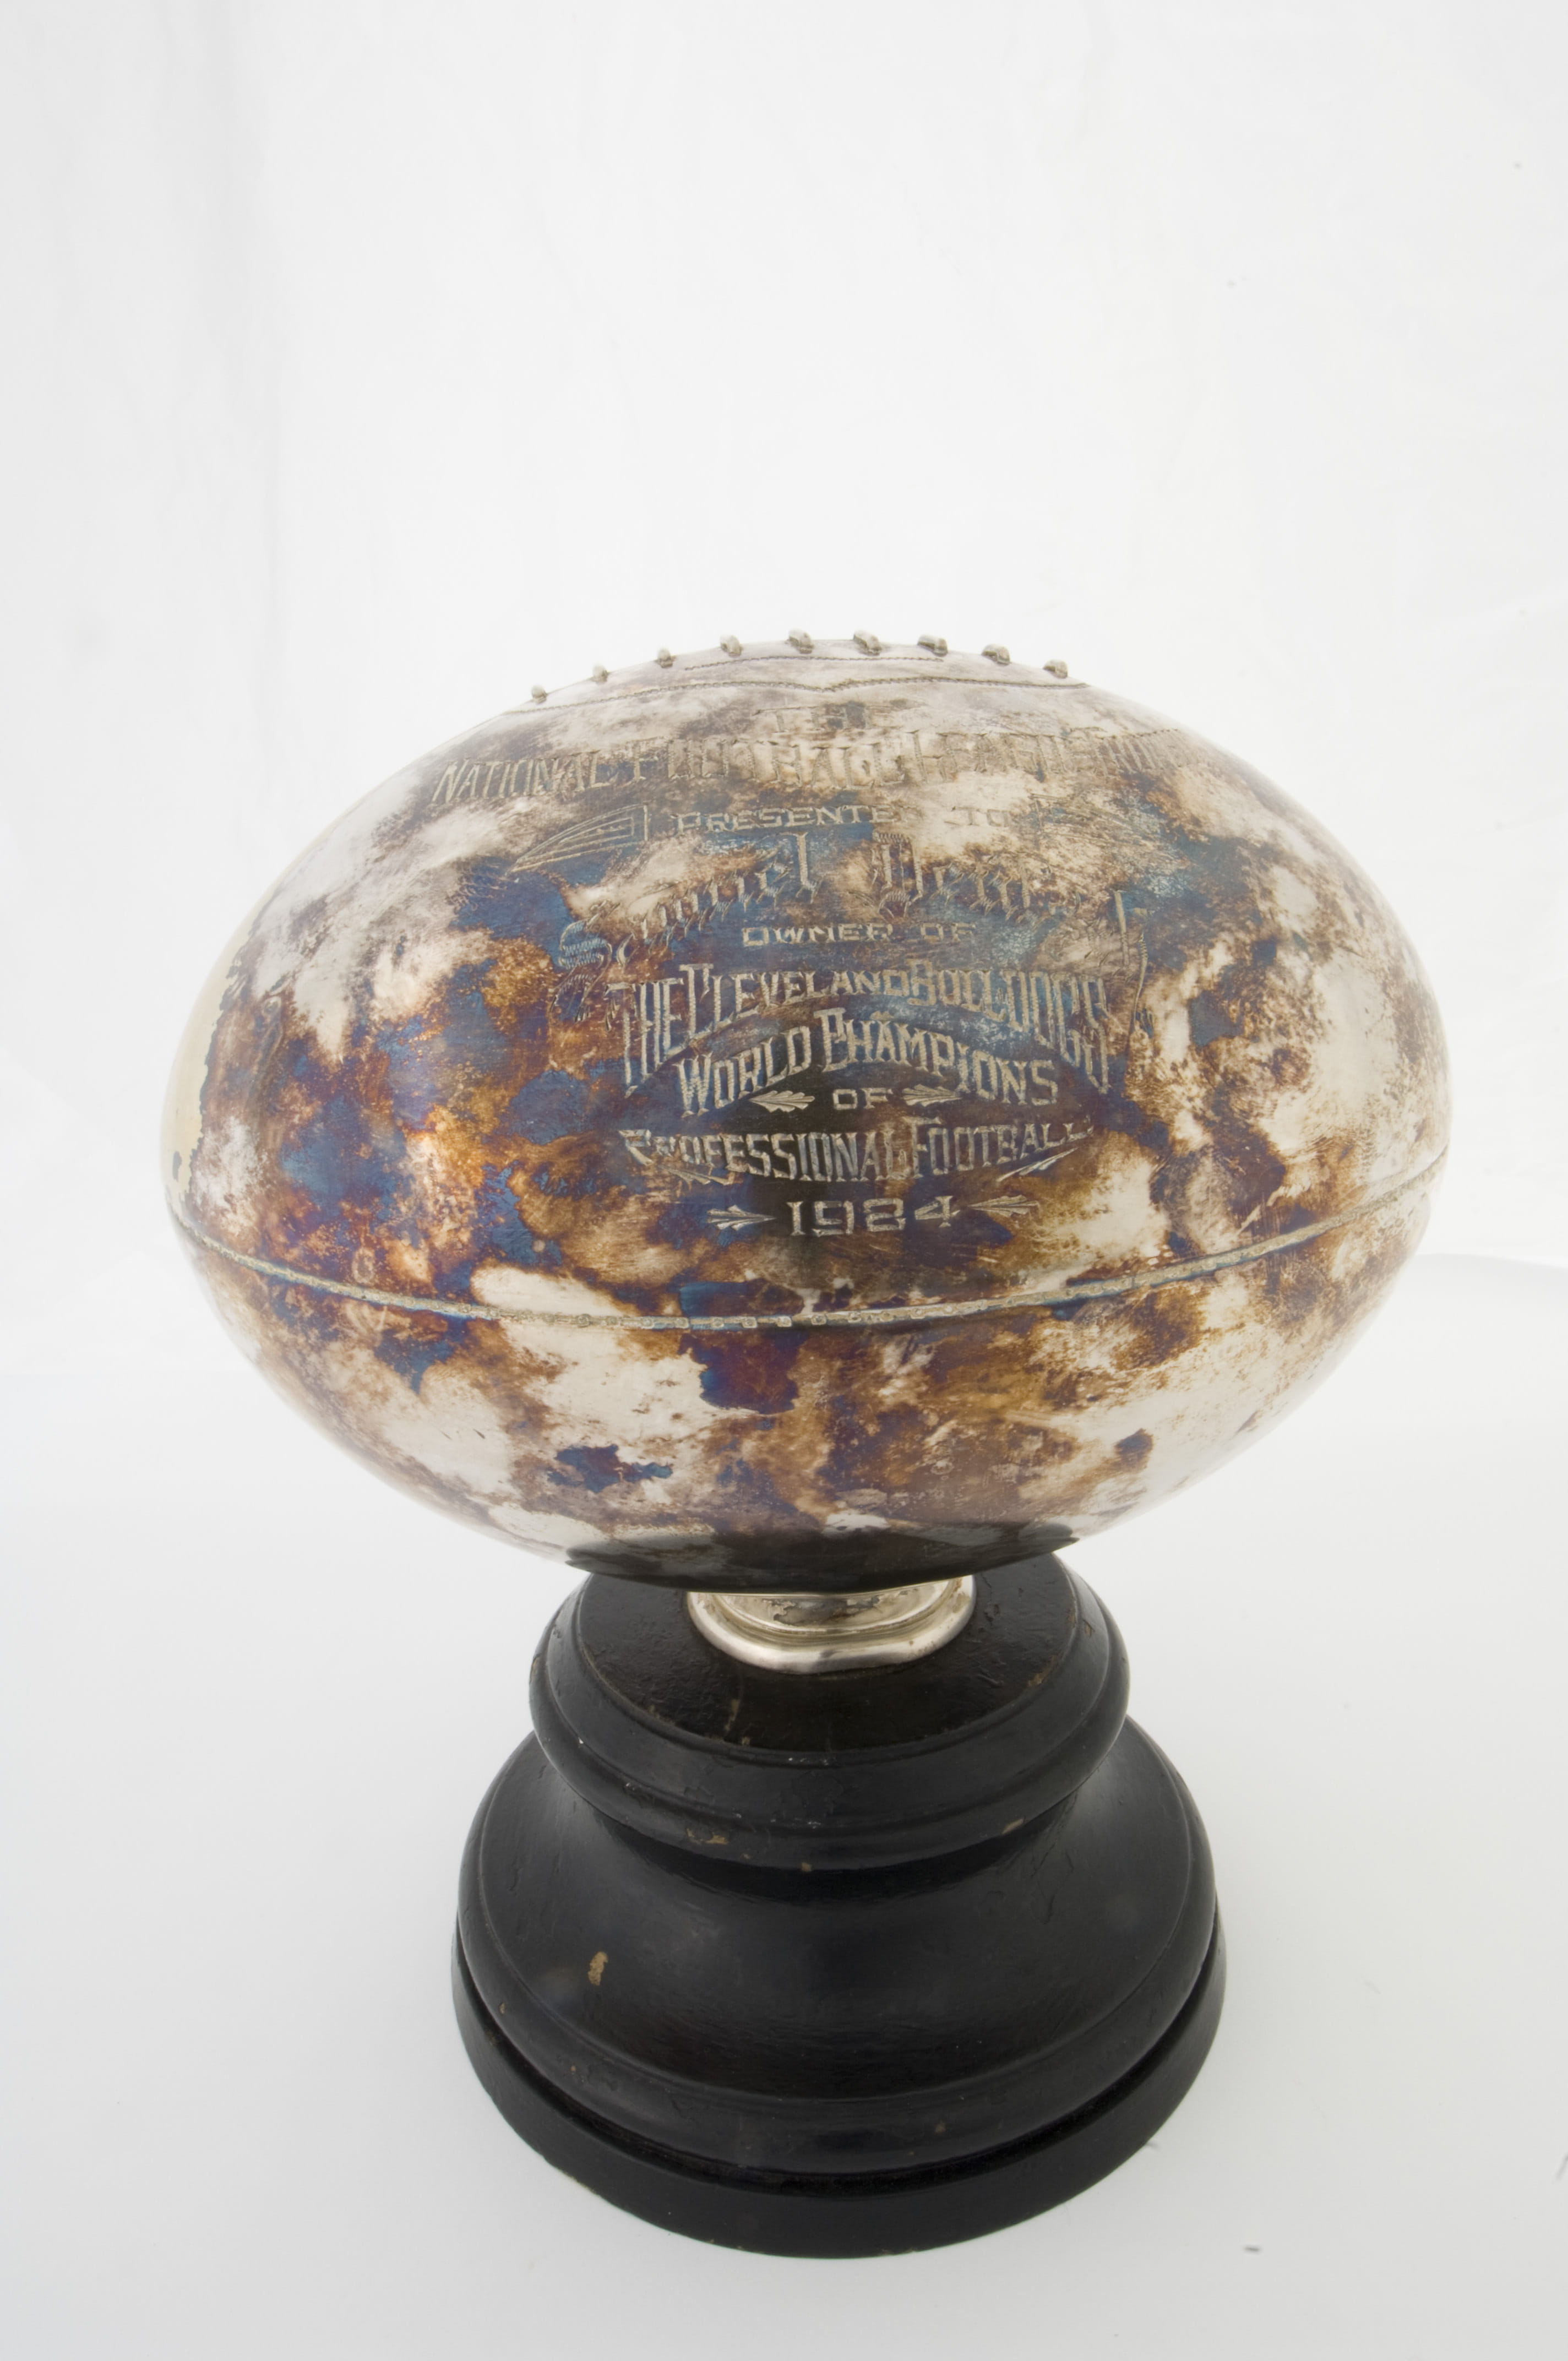 Cleveland Bulldogs 1924 championship trophy.